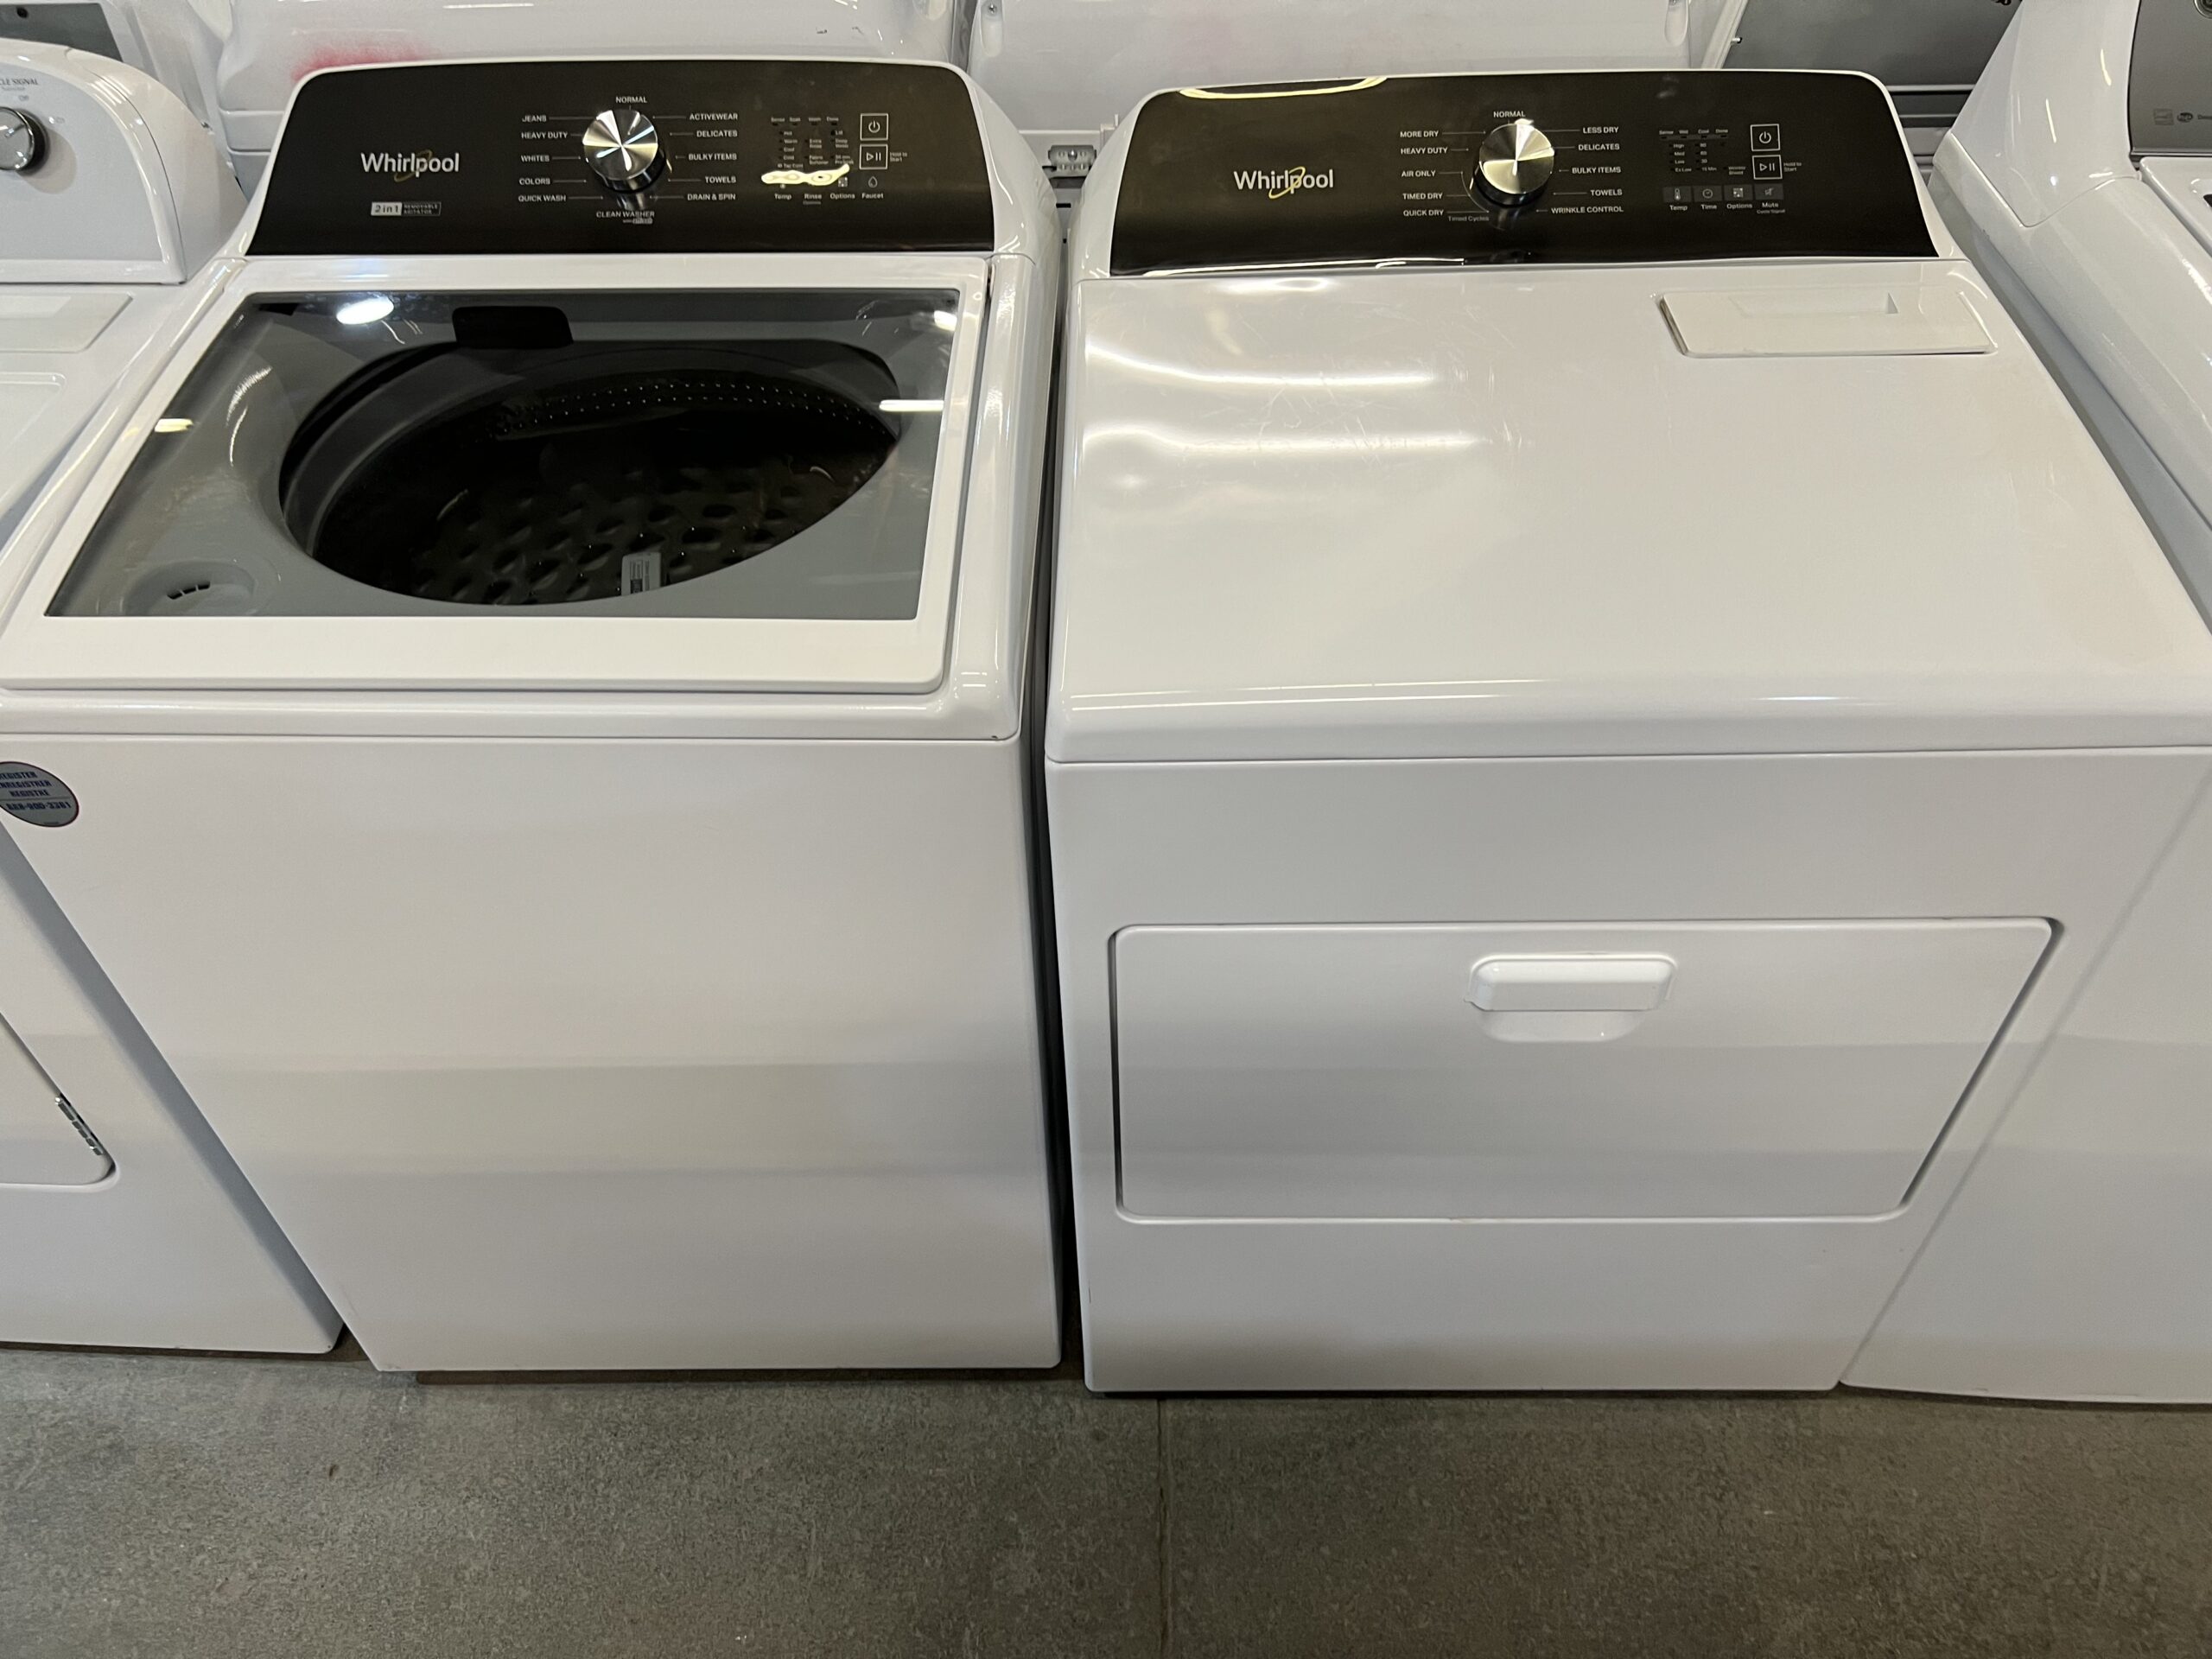 whirlpool washer and dryer set